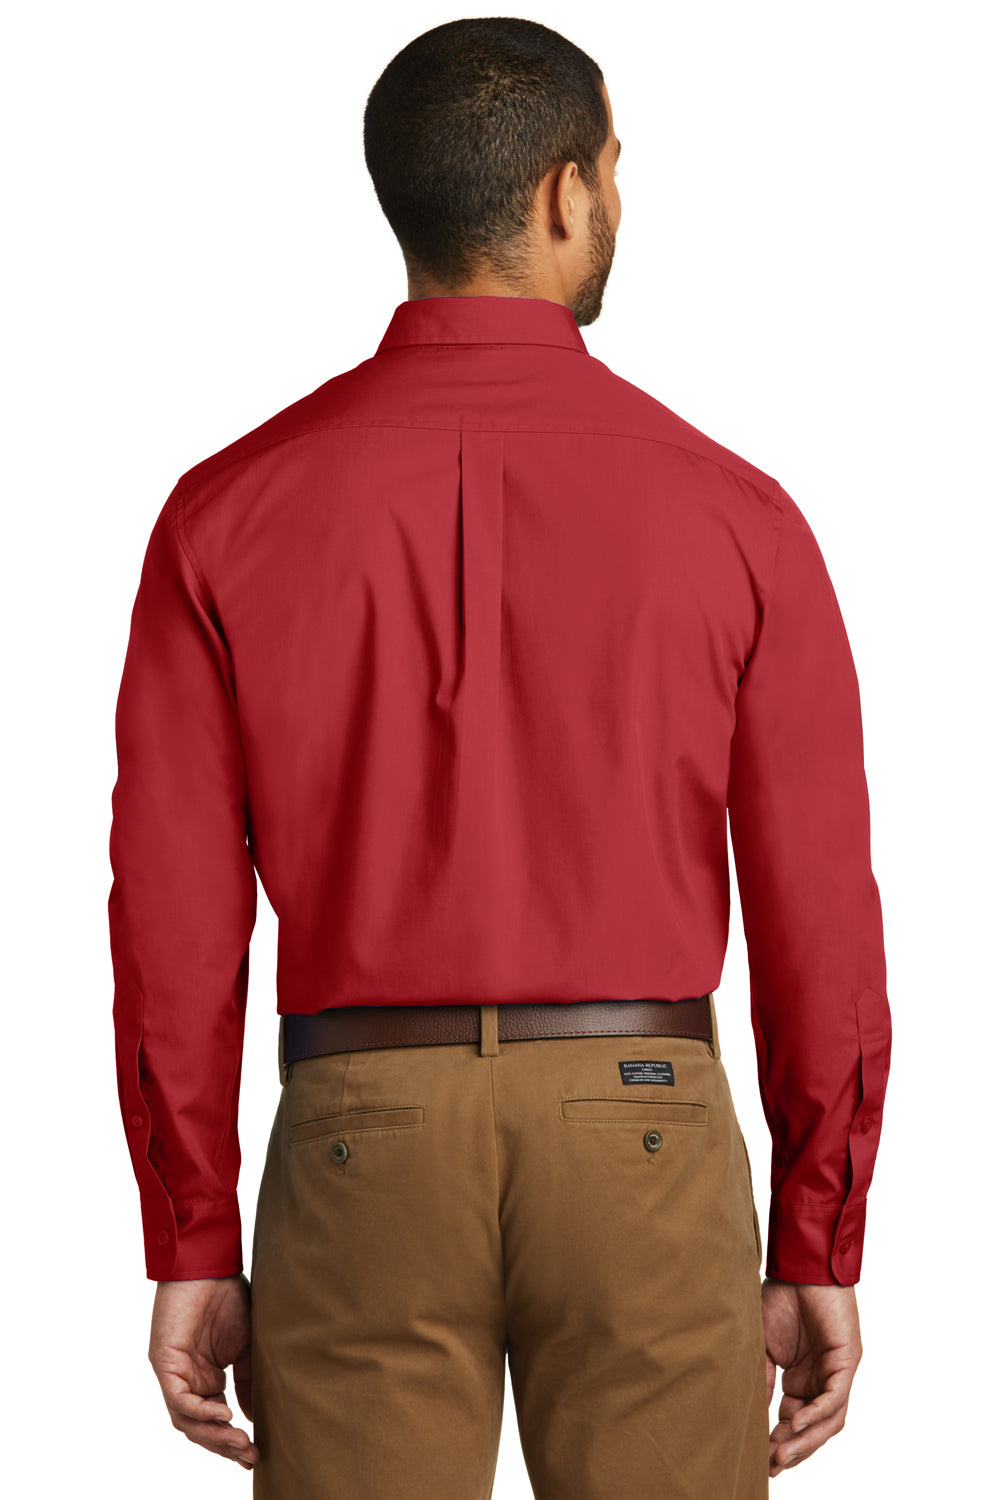 Port Authority W100 Mens Carefree Stain Resistant Long Sleeve Button Down Shirt w/ Pocket Red Back